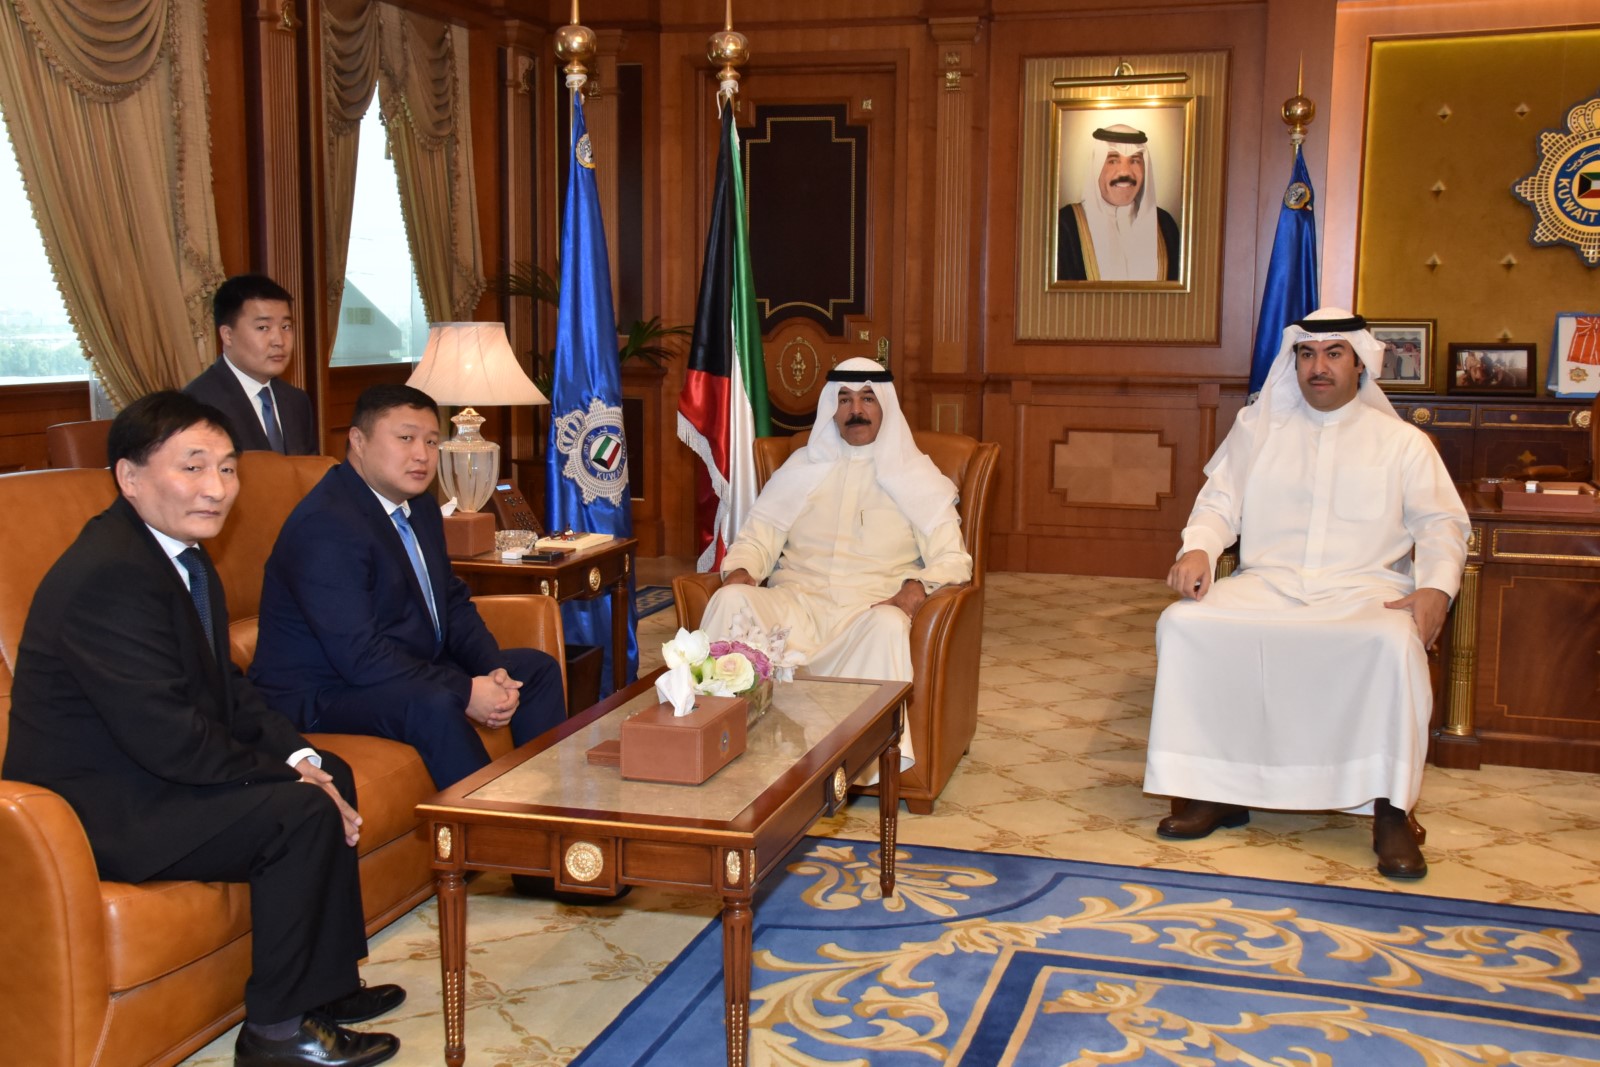 Deputy Prime Minister and Minister of Interior Sheikh Mohammad Al-Khaled Al-Hamad Al-Sabah recieveshead of Mongolia's National Security Council Khuts Bat